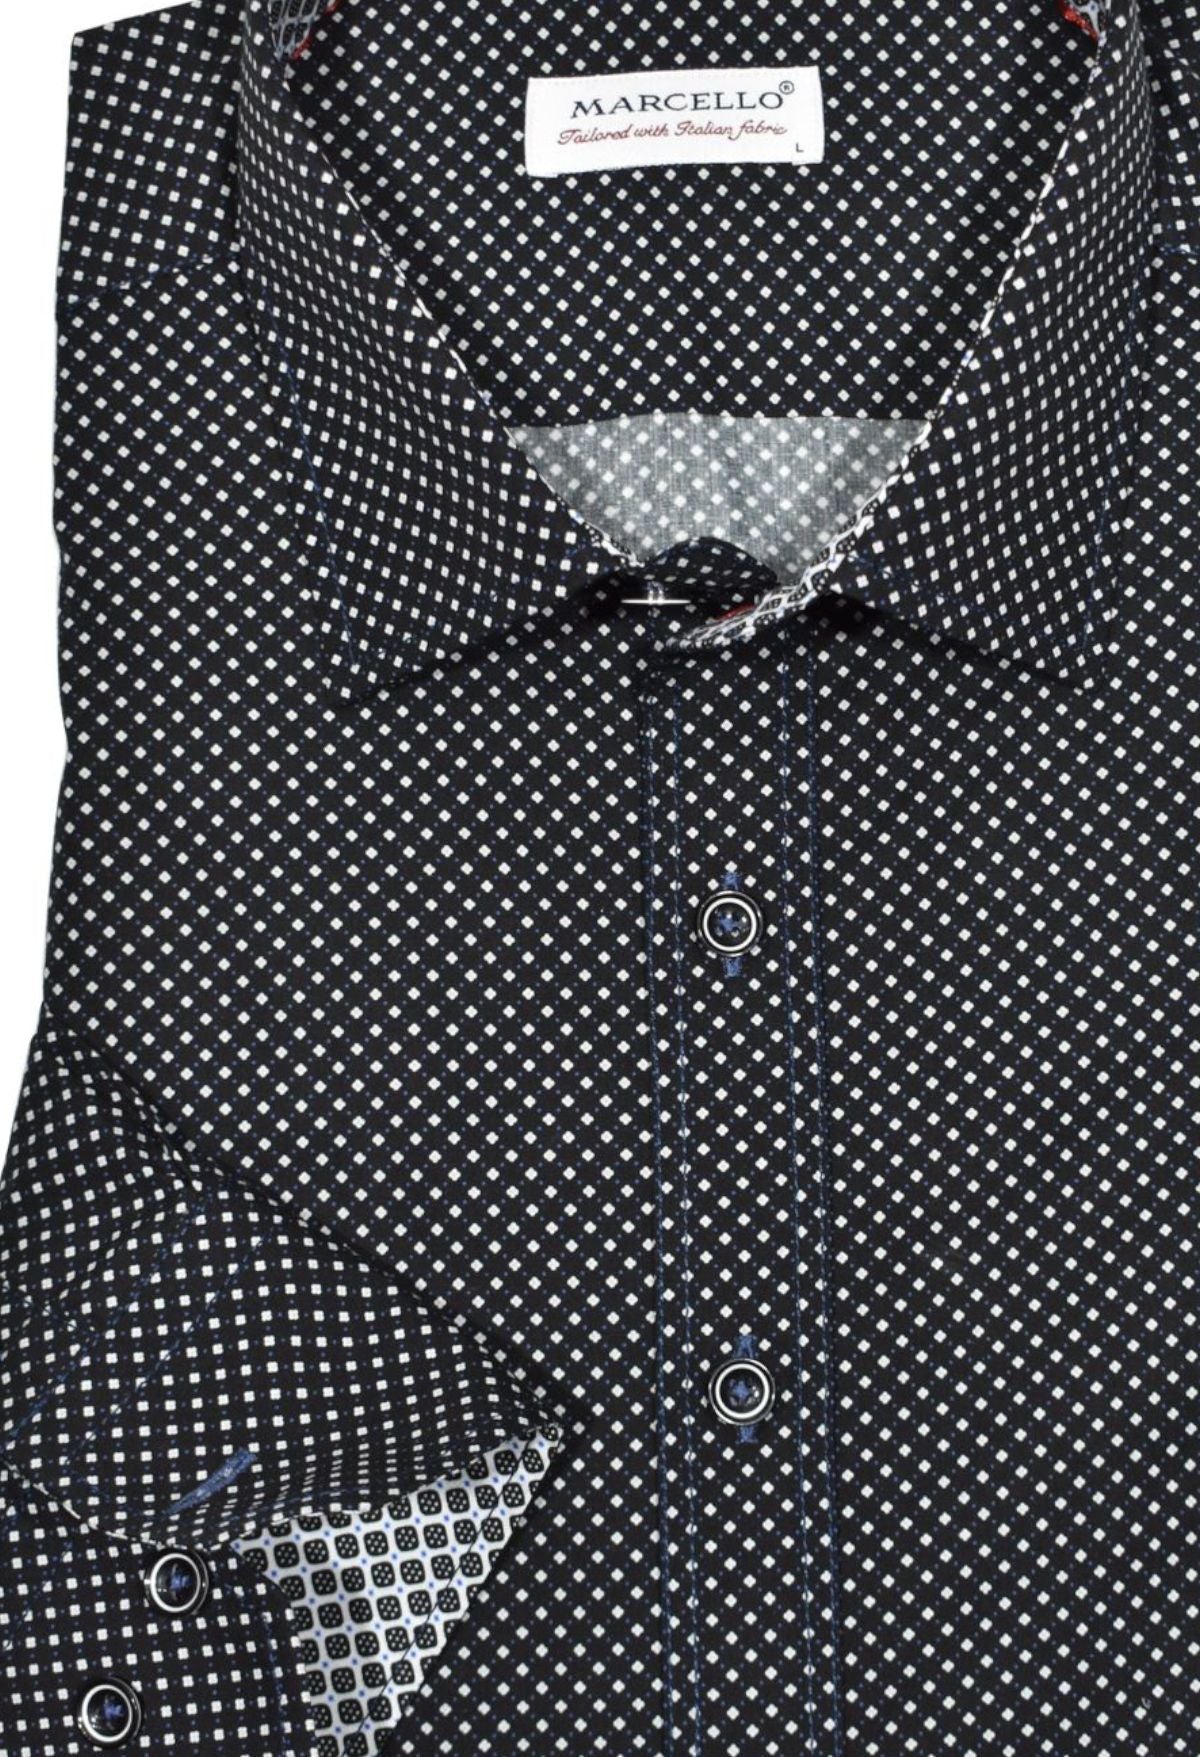 Bring sophistication and style to your wardrobe with our Marcello Midnight Roll Collar. Crafted from soft cotton for an ultra-luxe feel, the unique roll collar stands perfect and looks great alone or under a sport coat. Timeless white and royal dot pattern over a black ground. Elevate your look with contrast royal stitching, custom buttons and matched trim fabric.